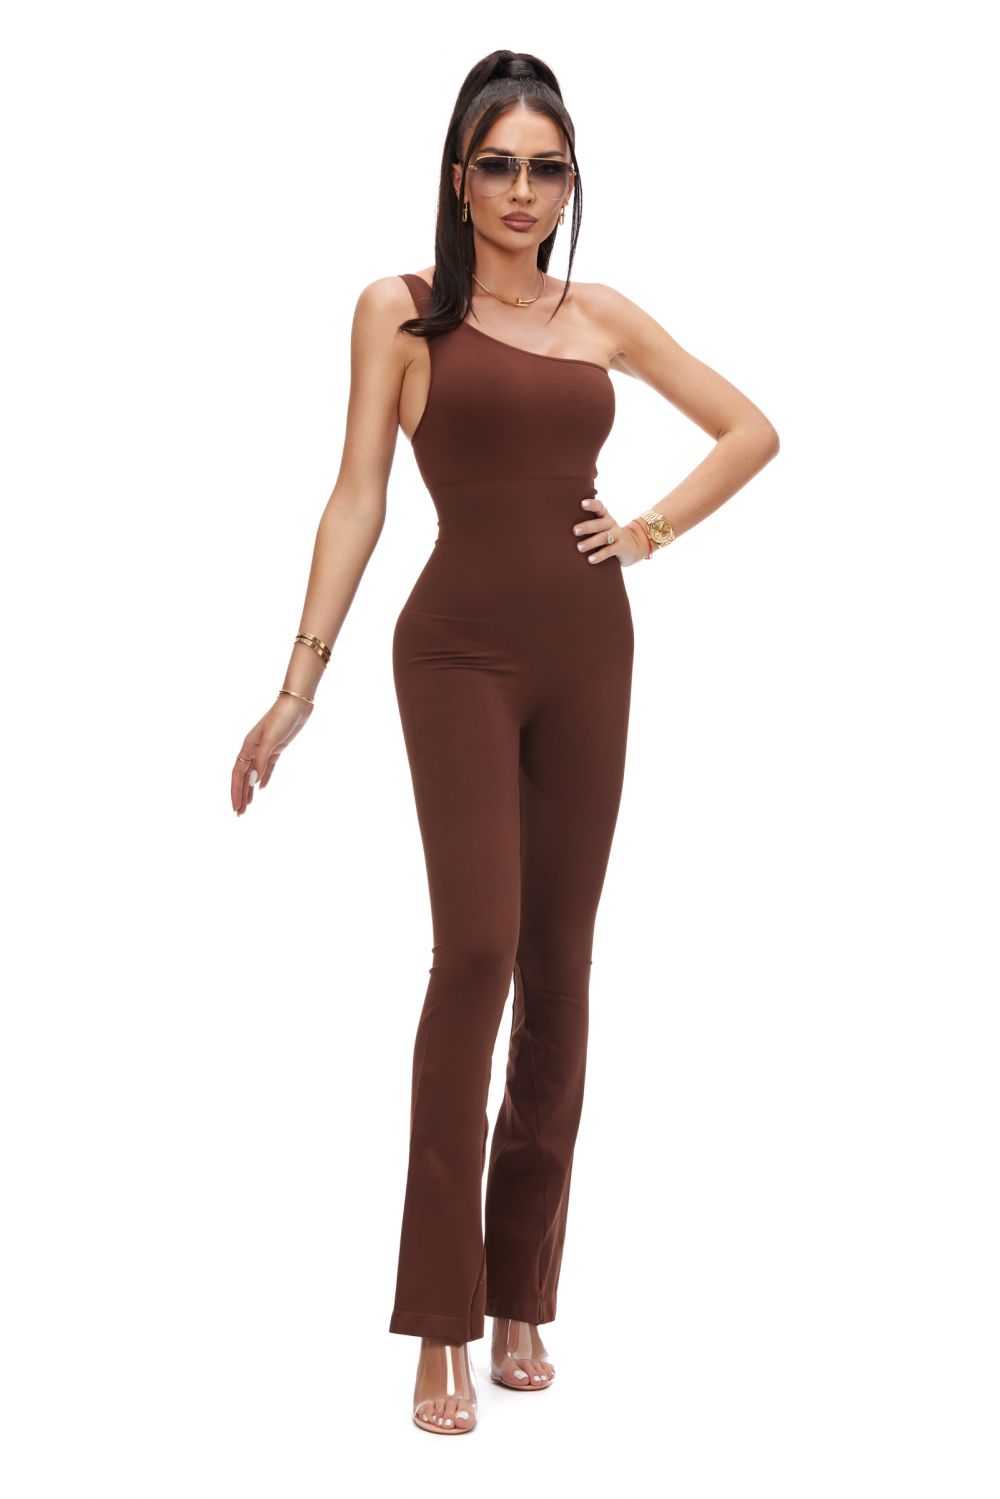 Ladies' casual brown modeling overalls Mimoza Bogas